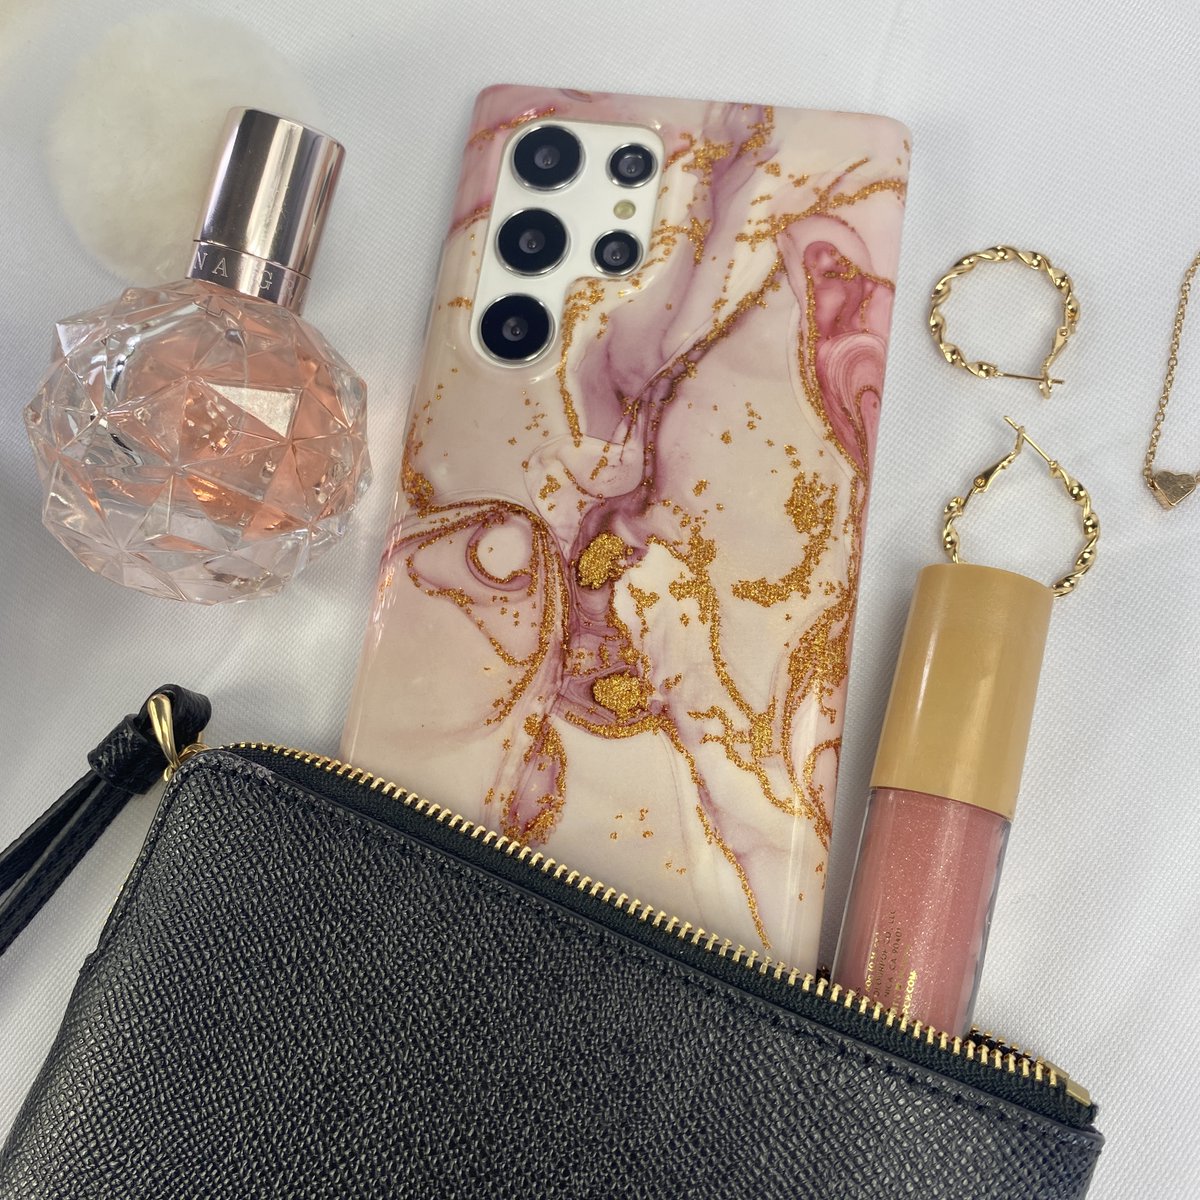 just in , Samsung 22 Plus and 22 Ultra Cases ❣

This is your go to spot for cute and affordable Samsung cases 💫

#samsung #samsung22plus #samsungultra #samsung22 #samsungphonecases #phonecase #marblepink #dustedmarble #pinkcase #pinkphonecase #fashion #trendy #glam #mua